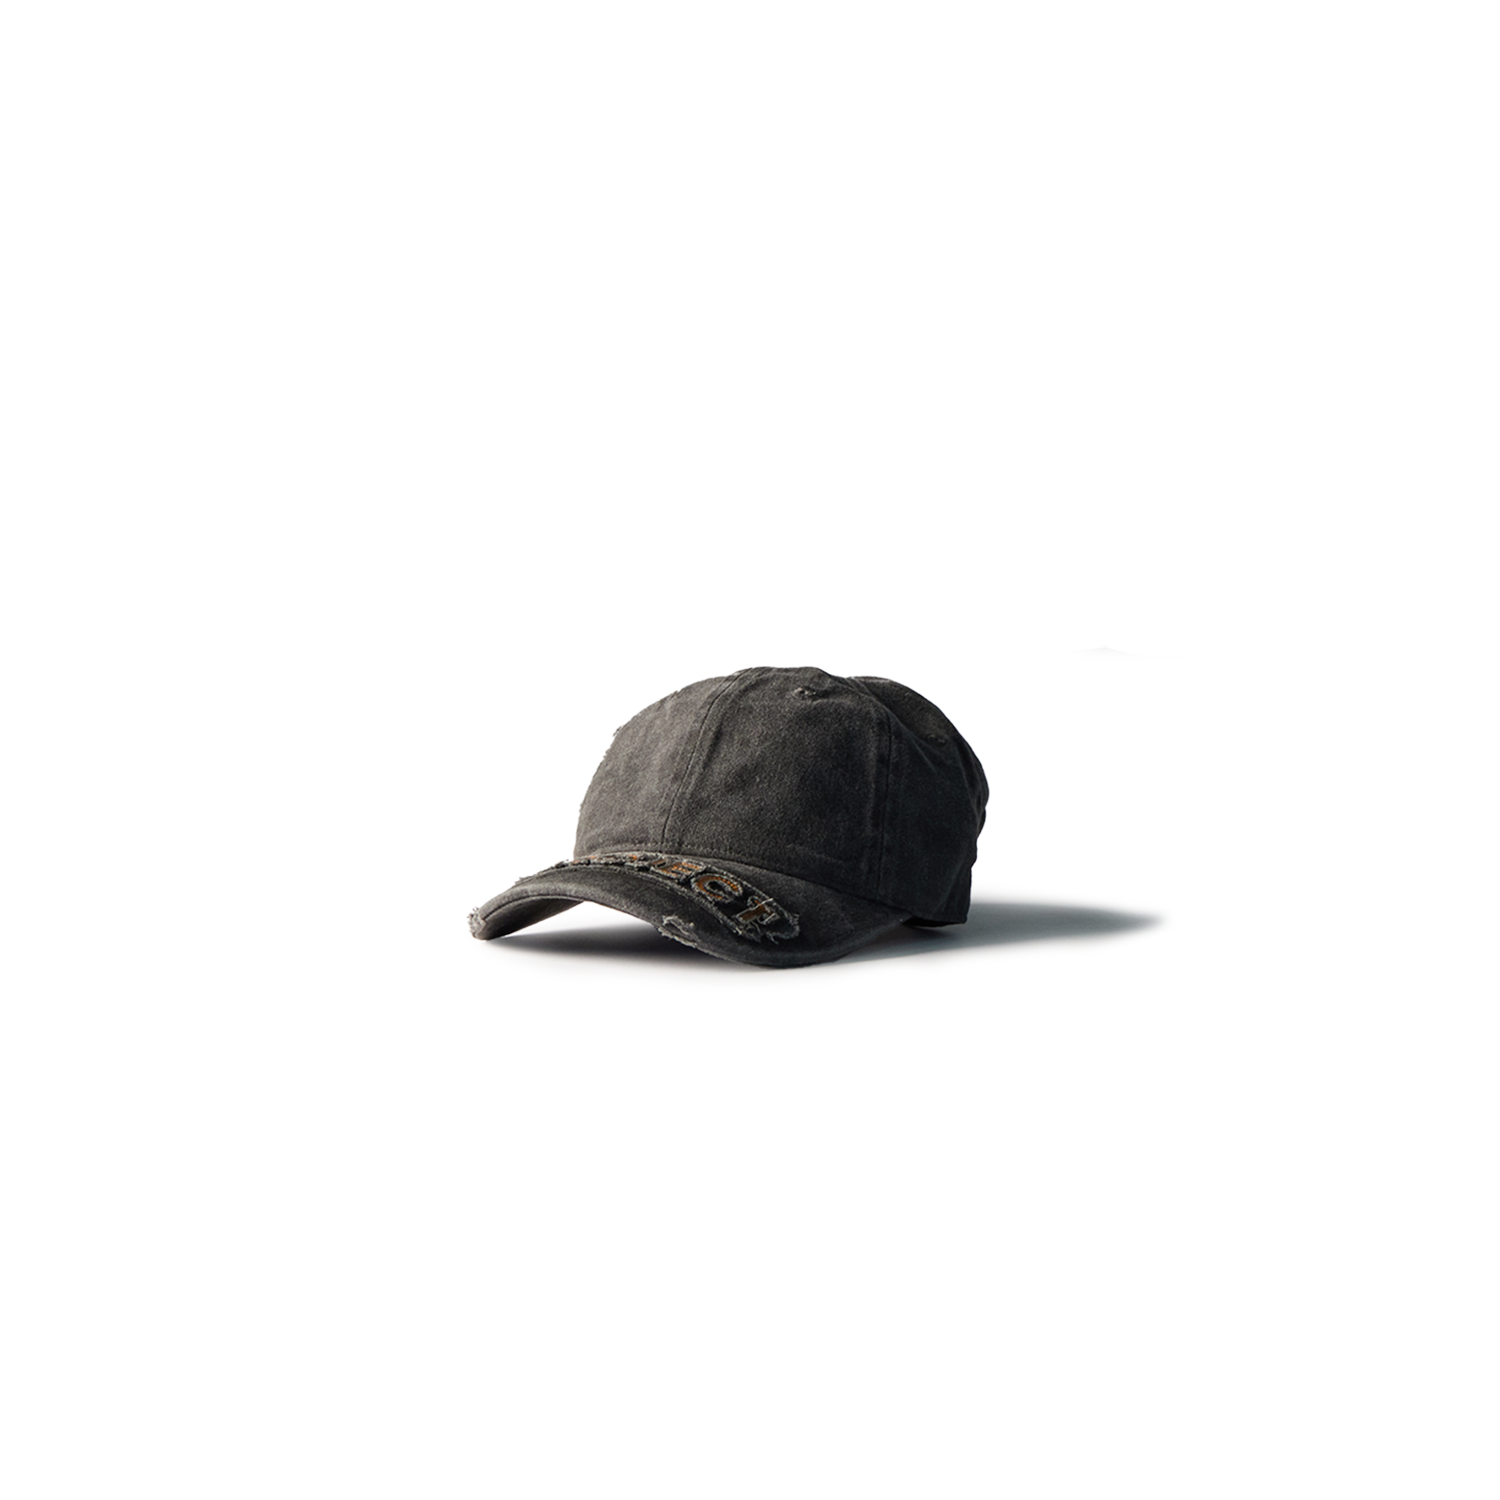 Y/PROJECT - Y/Project Baseball Cap product image